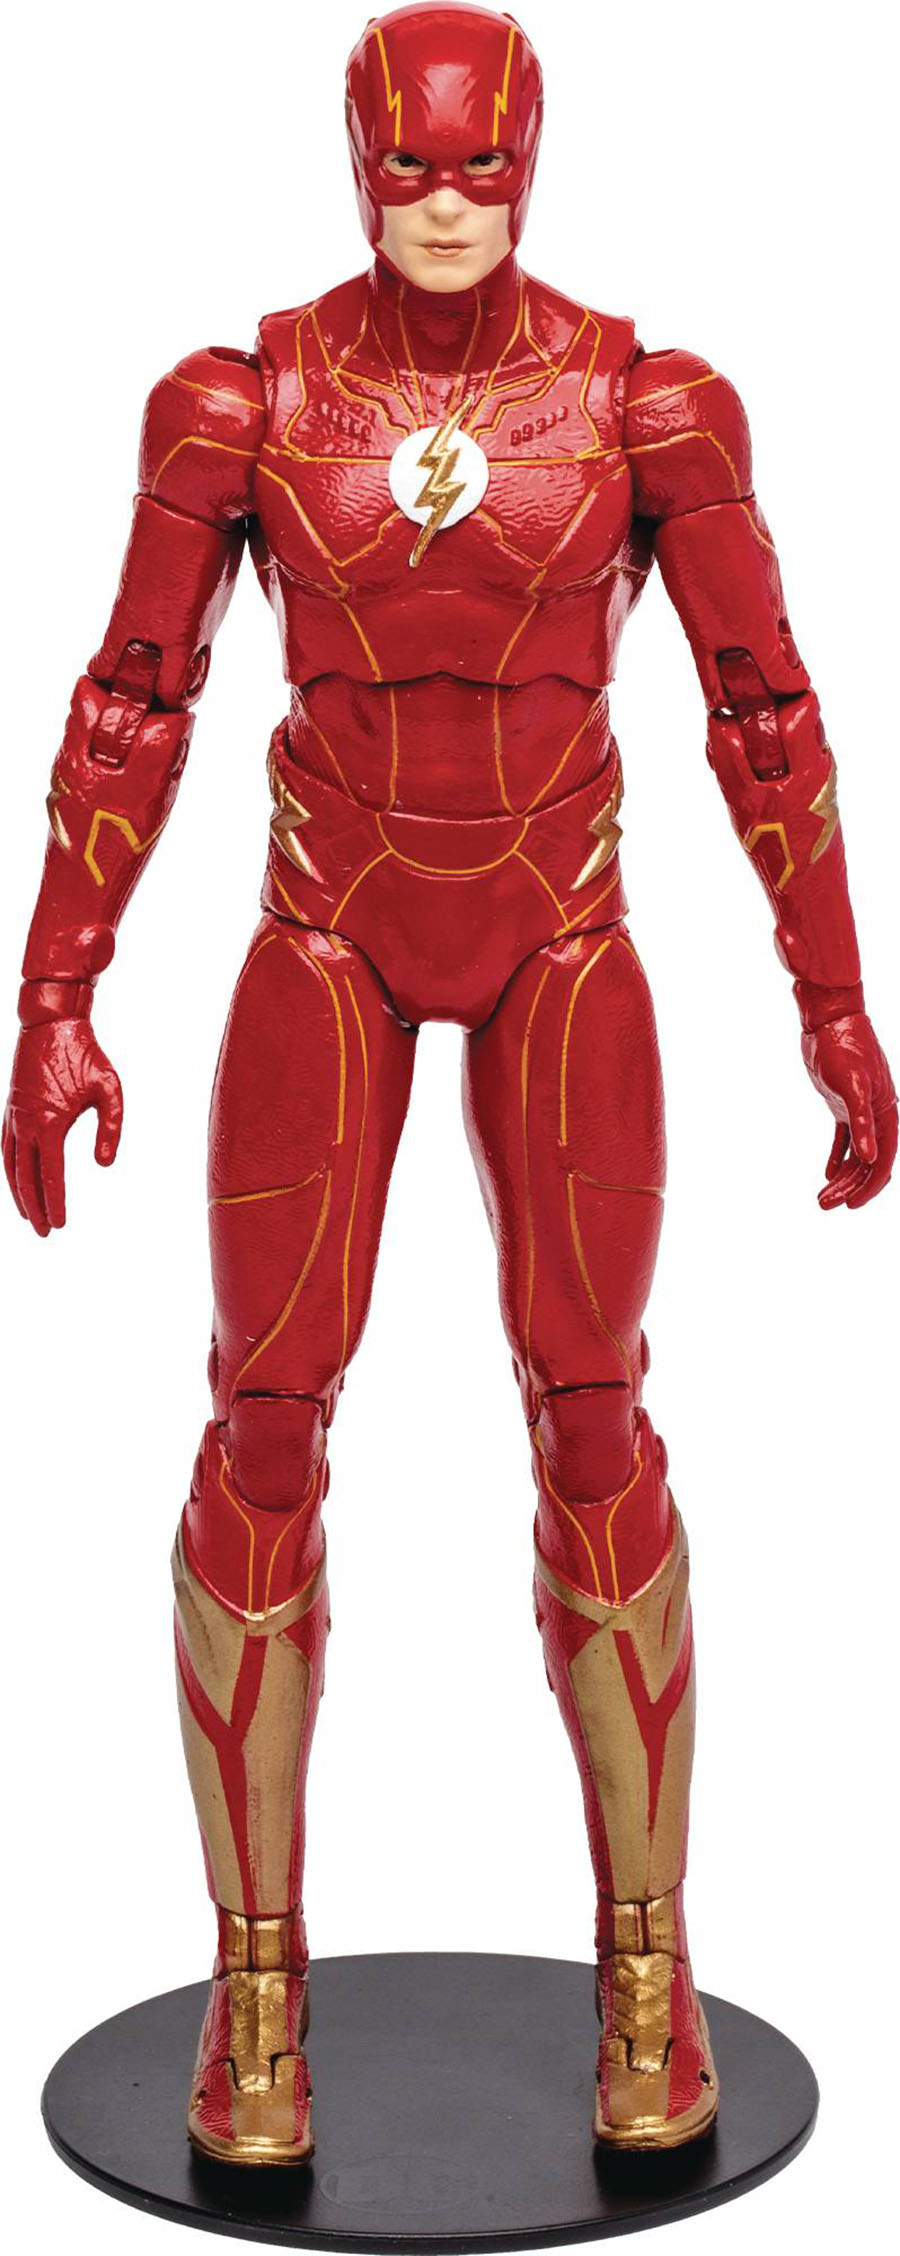 Flash Movie Speed Force Flash 7-Inch Action Figure